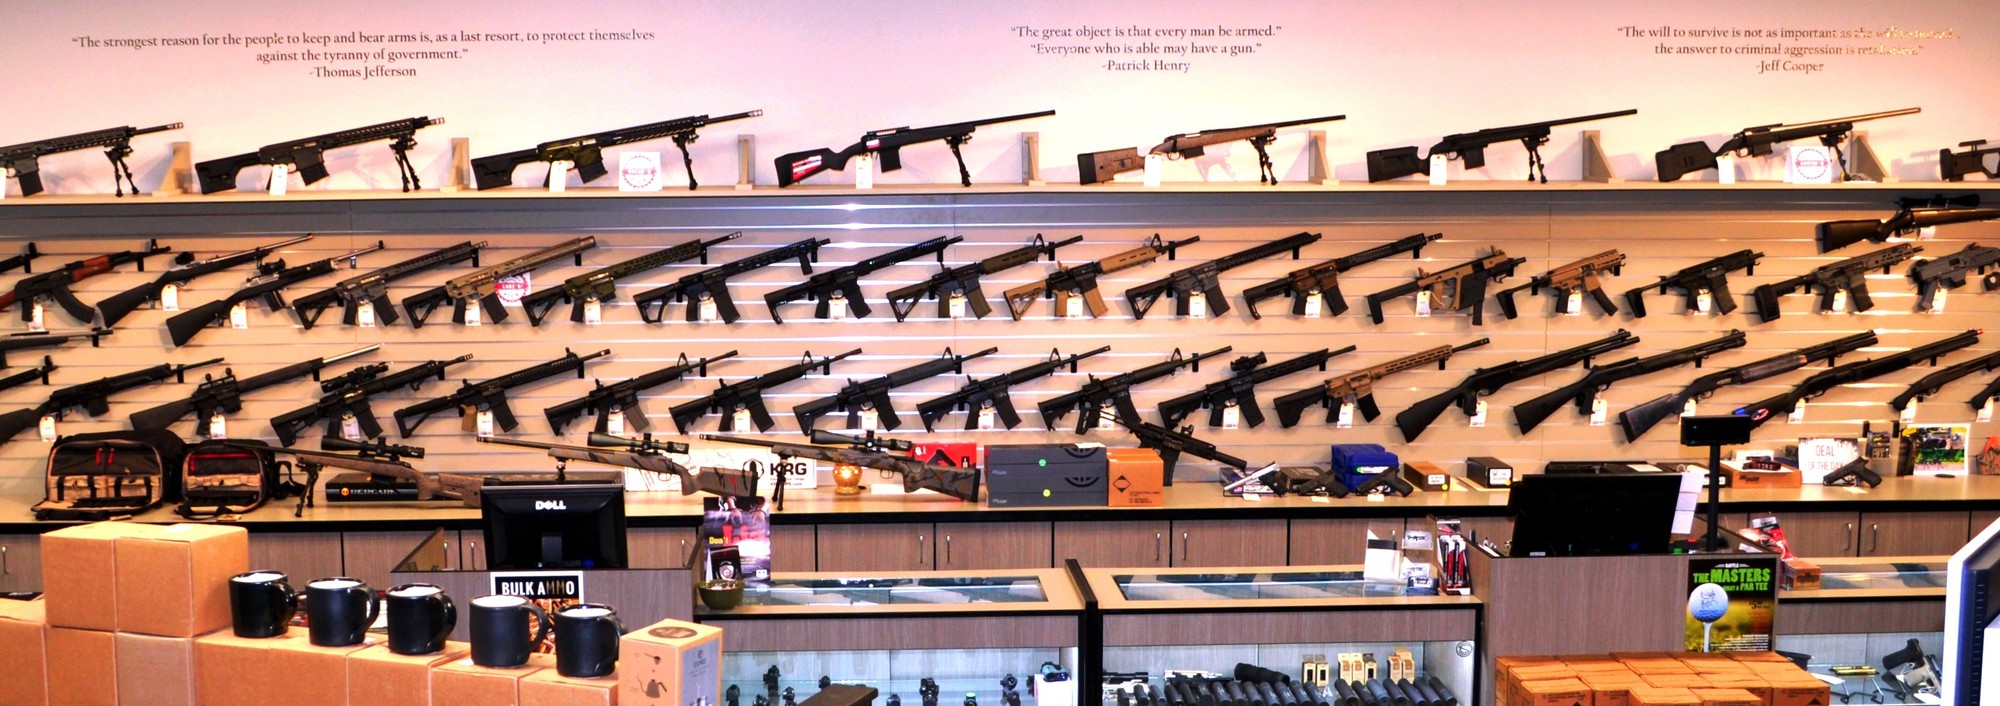 Central Washington's Premier Firearms Retail, Indoor Shooting and Training Facility